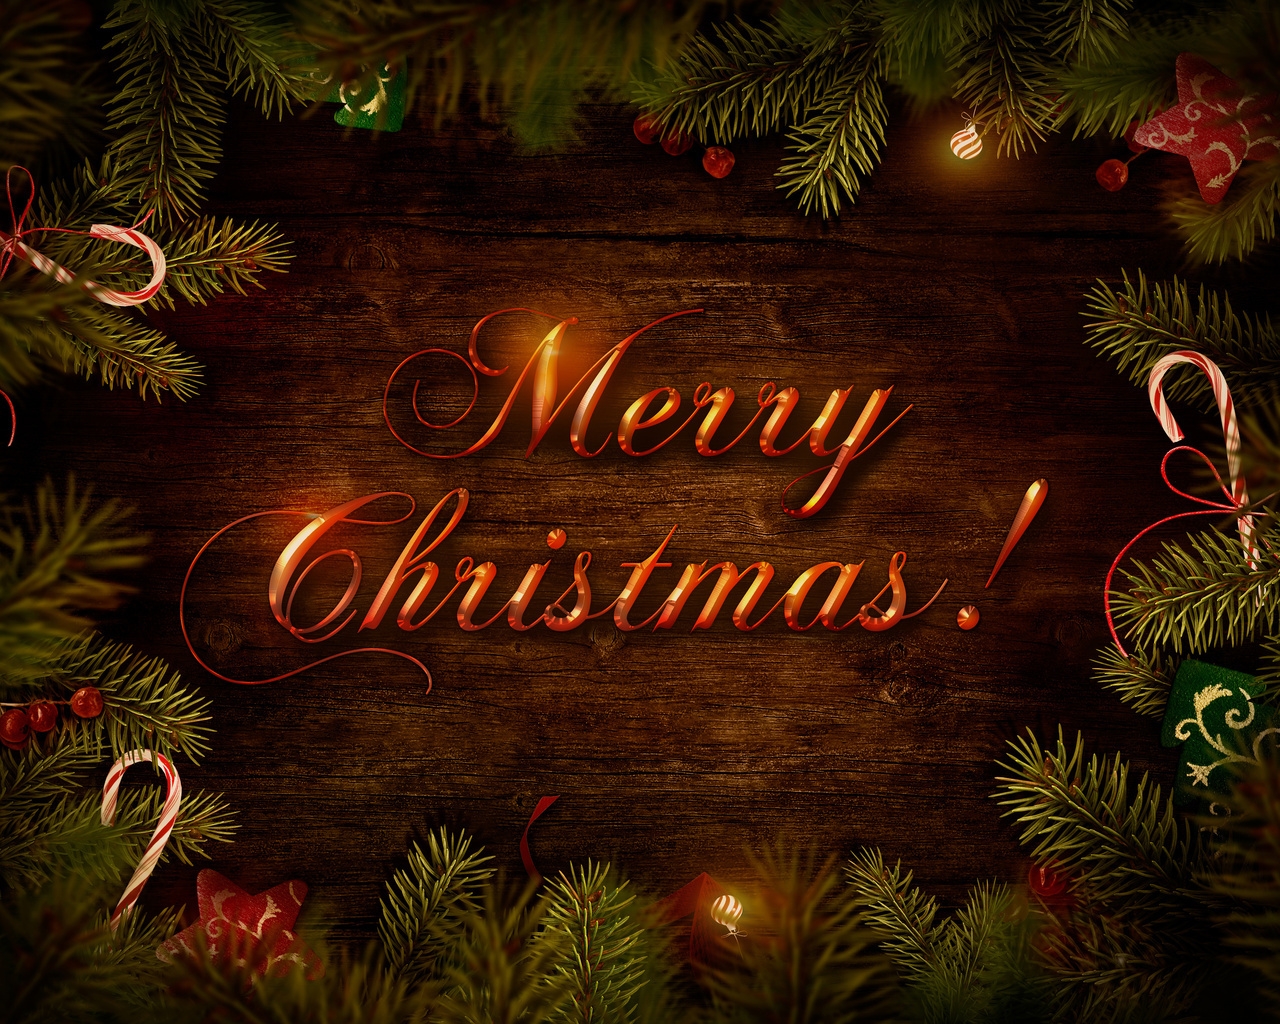 Merry Christmas Wish Decoration for 1280 x 1024 resolution